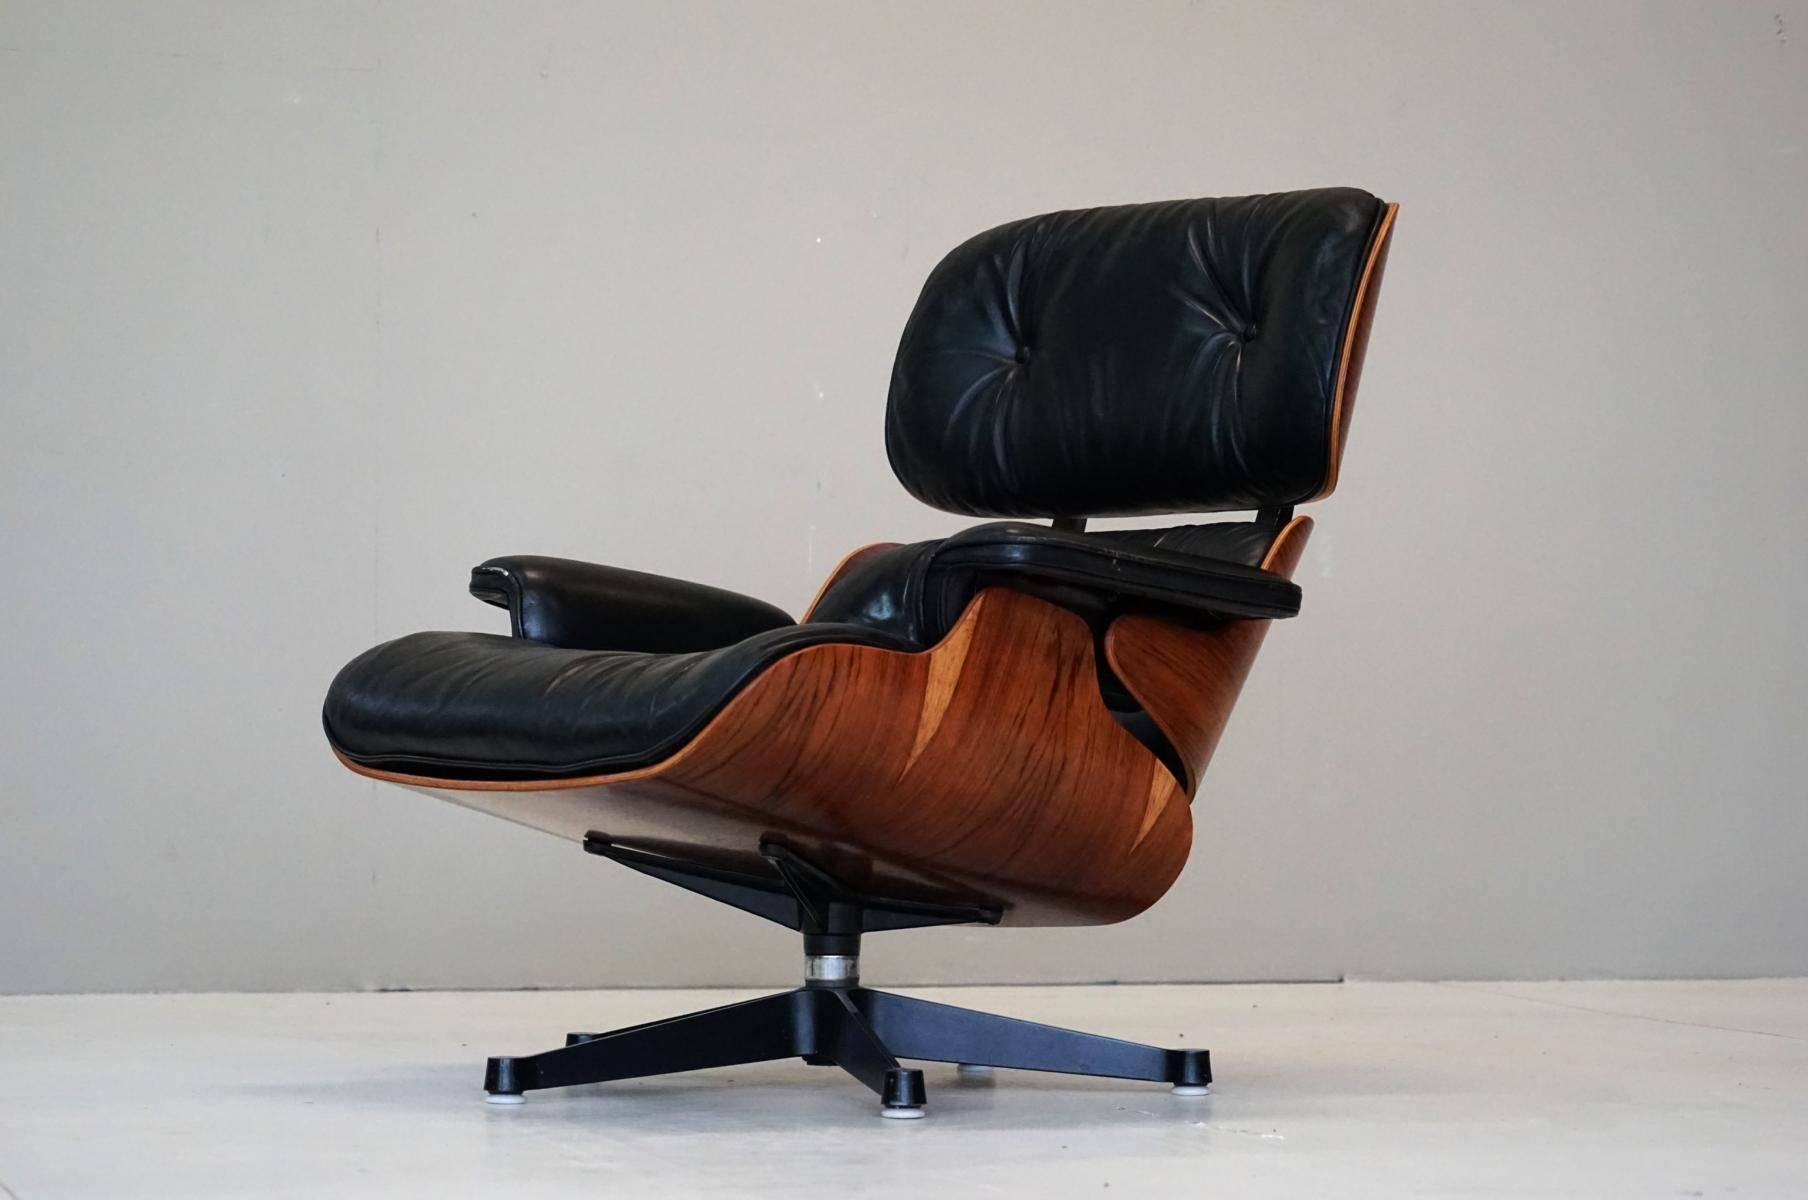 Charles Eames original lounge chair Herman Miller leather rosewood armchair
Since 1956 the lounge chair offers ultimate comfort. This lounge chair is like the original lounge chair: in rosewood and leather. The wooden shells are perfect. They were